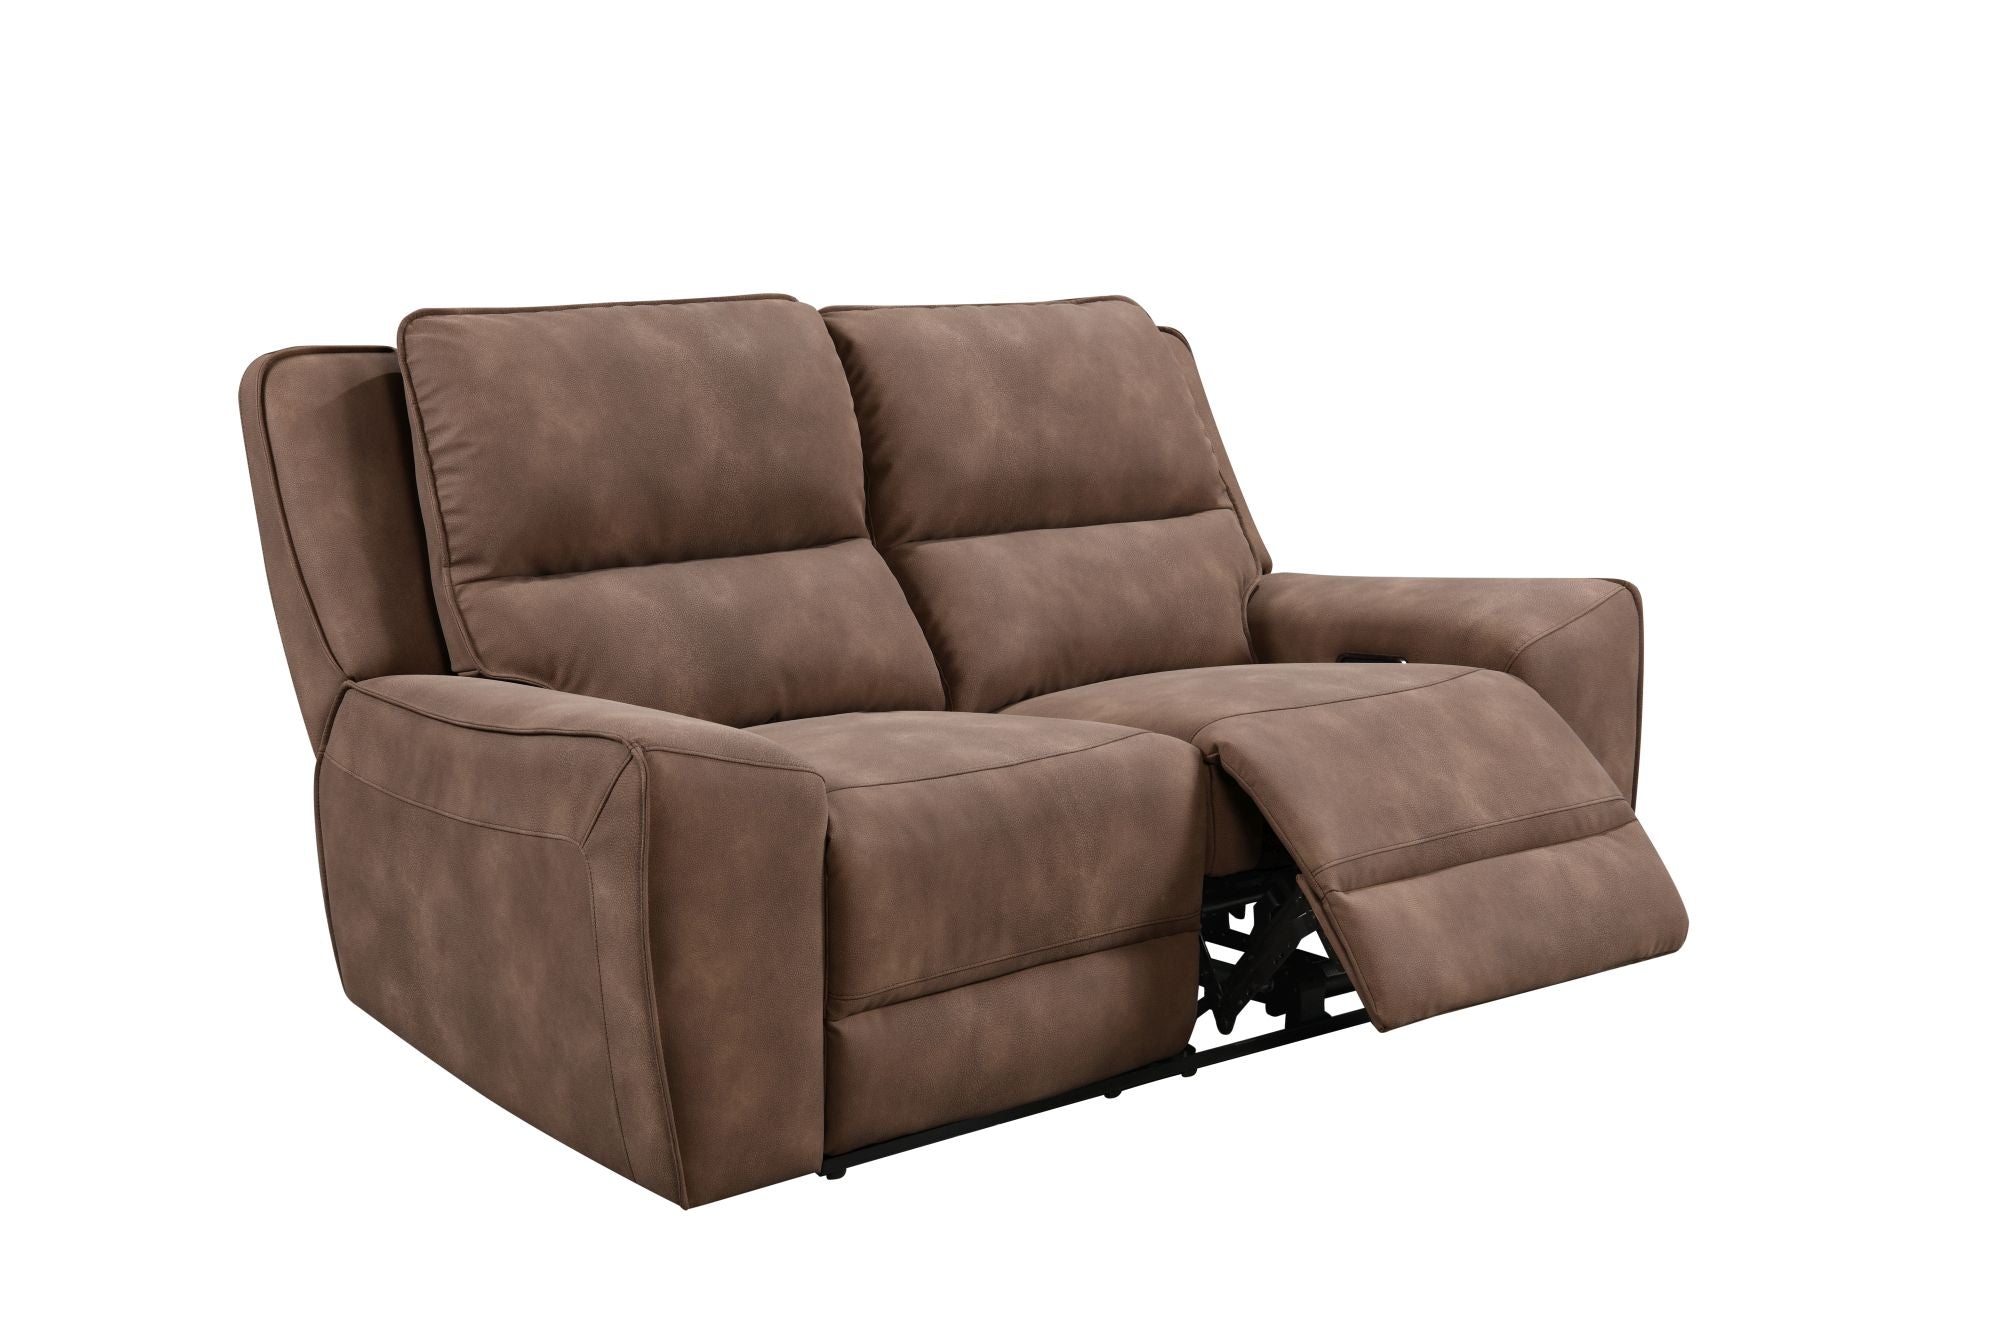 Grande 2 Seater Sofa Power Recliner with Power Headrest